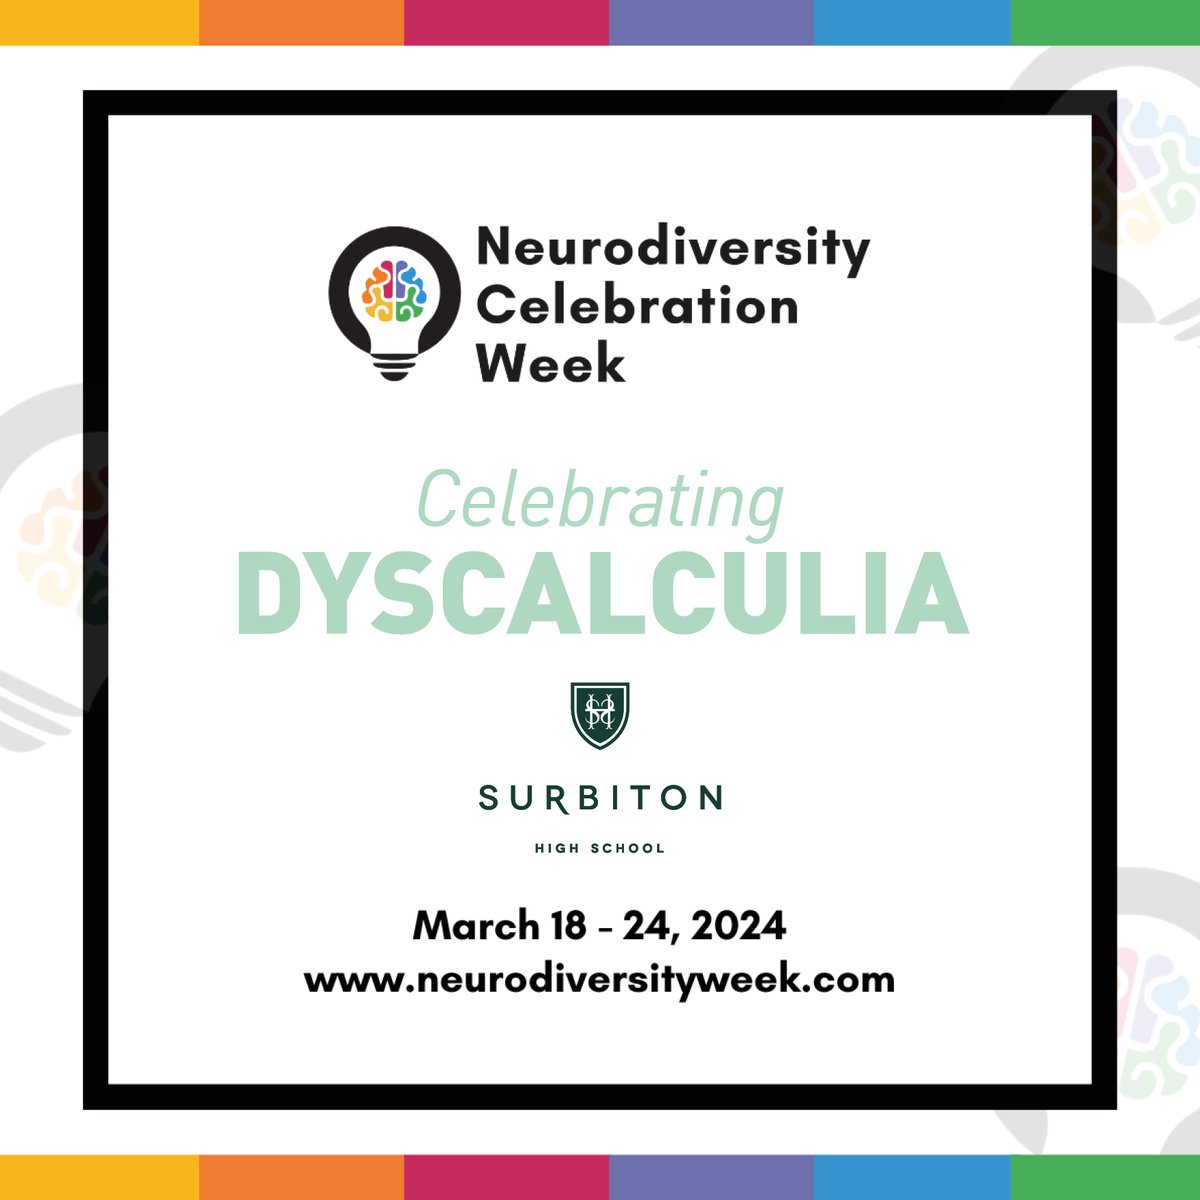 Did you know? Dyscalculia and Maths Difficulties affect more people than you might think. Did you know about 6% of individuals have dyscalculia? That's about 25% of the population struggling with maths learning difficulties. #NeurodiversityCelebrationWeek